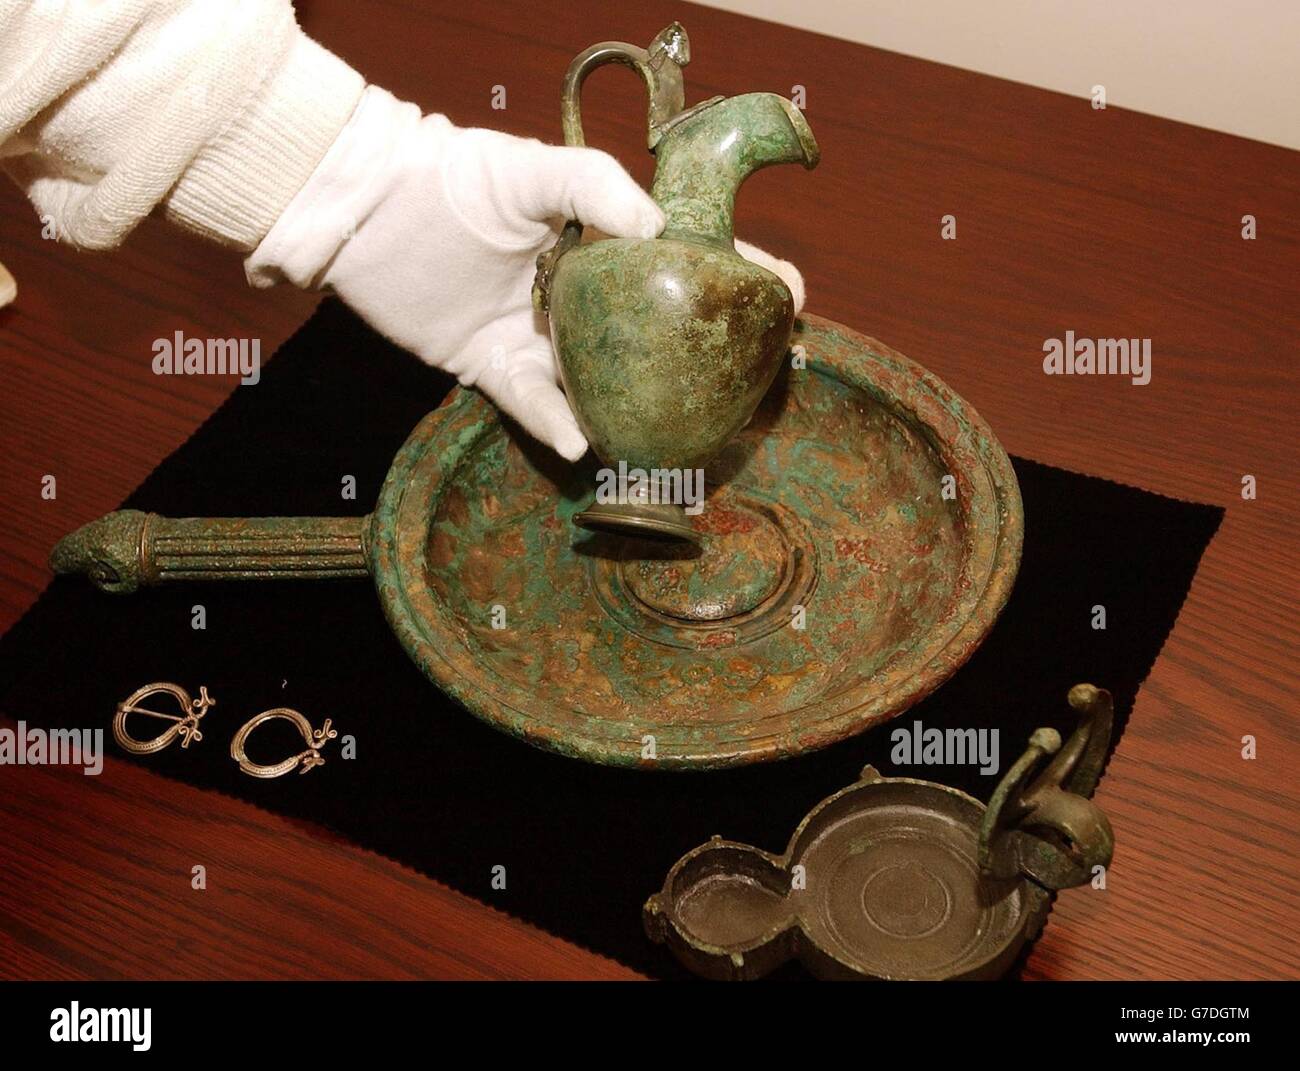 A bronze jug, dish, and oil burner from around the 2nd Century AD, which was found buried near to St Albans, on show at the Guildhall. The Minister of the Arts Estelle Morris was in the City of London to announce that 47,000 archaeologicial finds were unearthed by members of the public last year, shedding new light on the history of Britain. Stock Photo